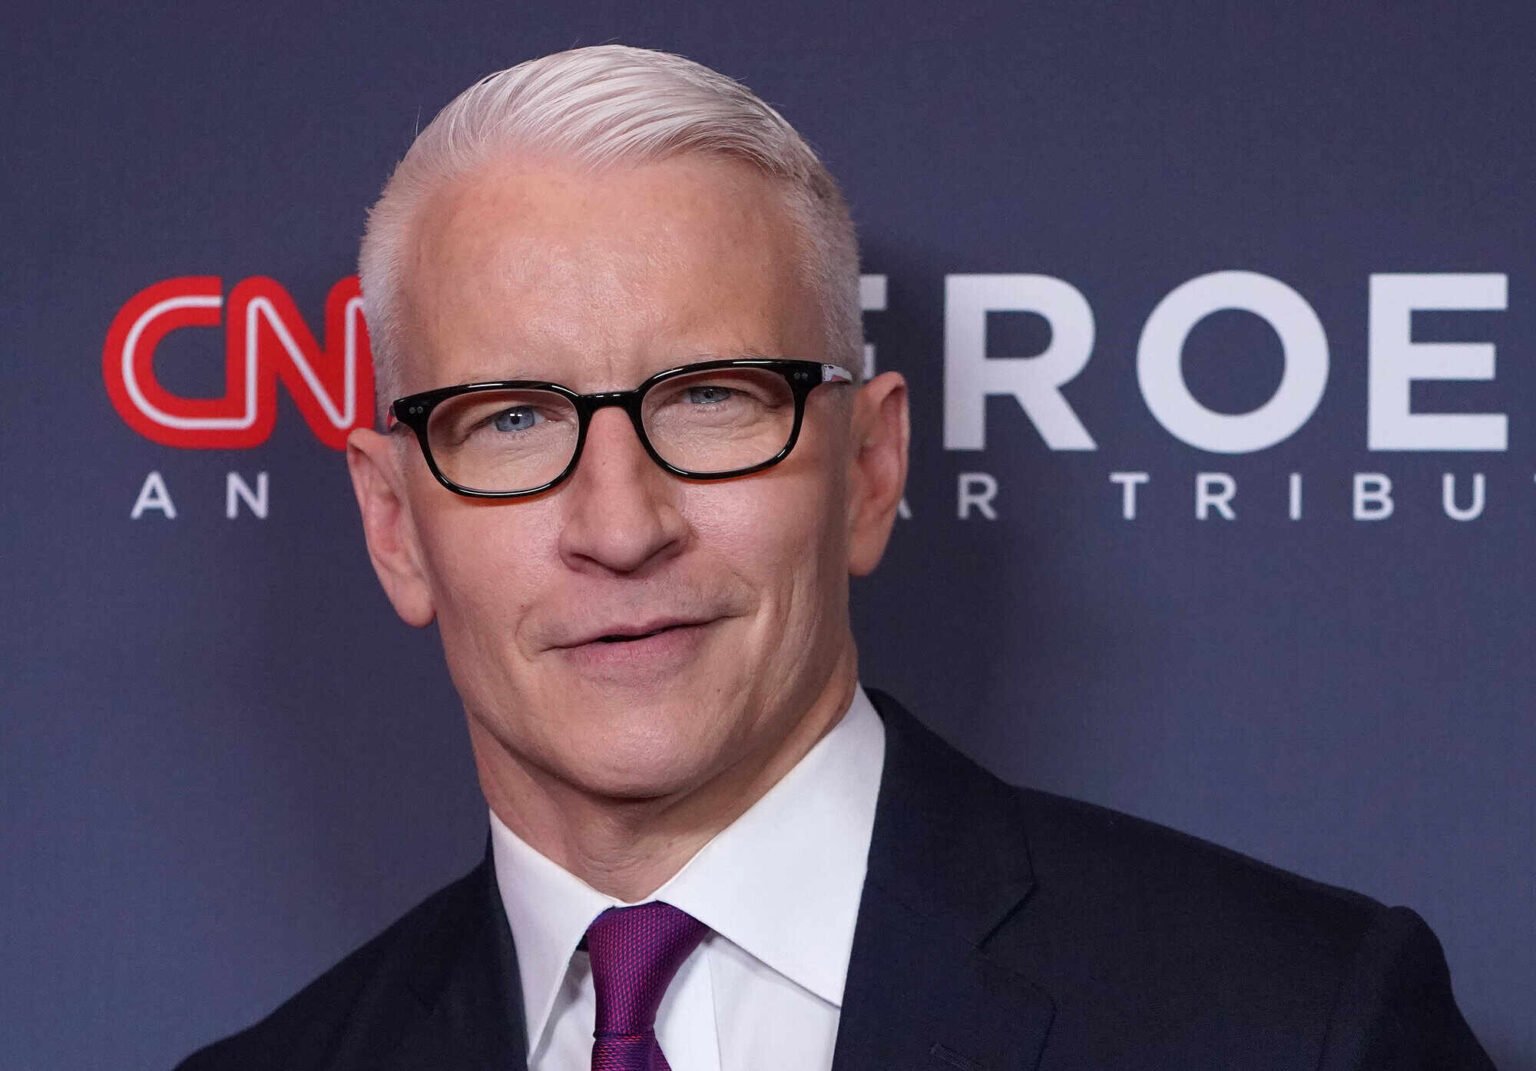 Love or hate him– we all know the name of CNN's most beloved news anchor, but just how much money does he have? Find out Anderson Cooper's net worth here.